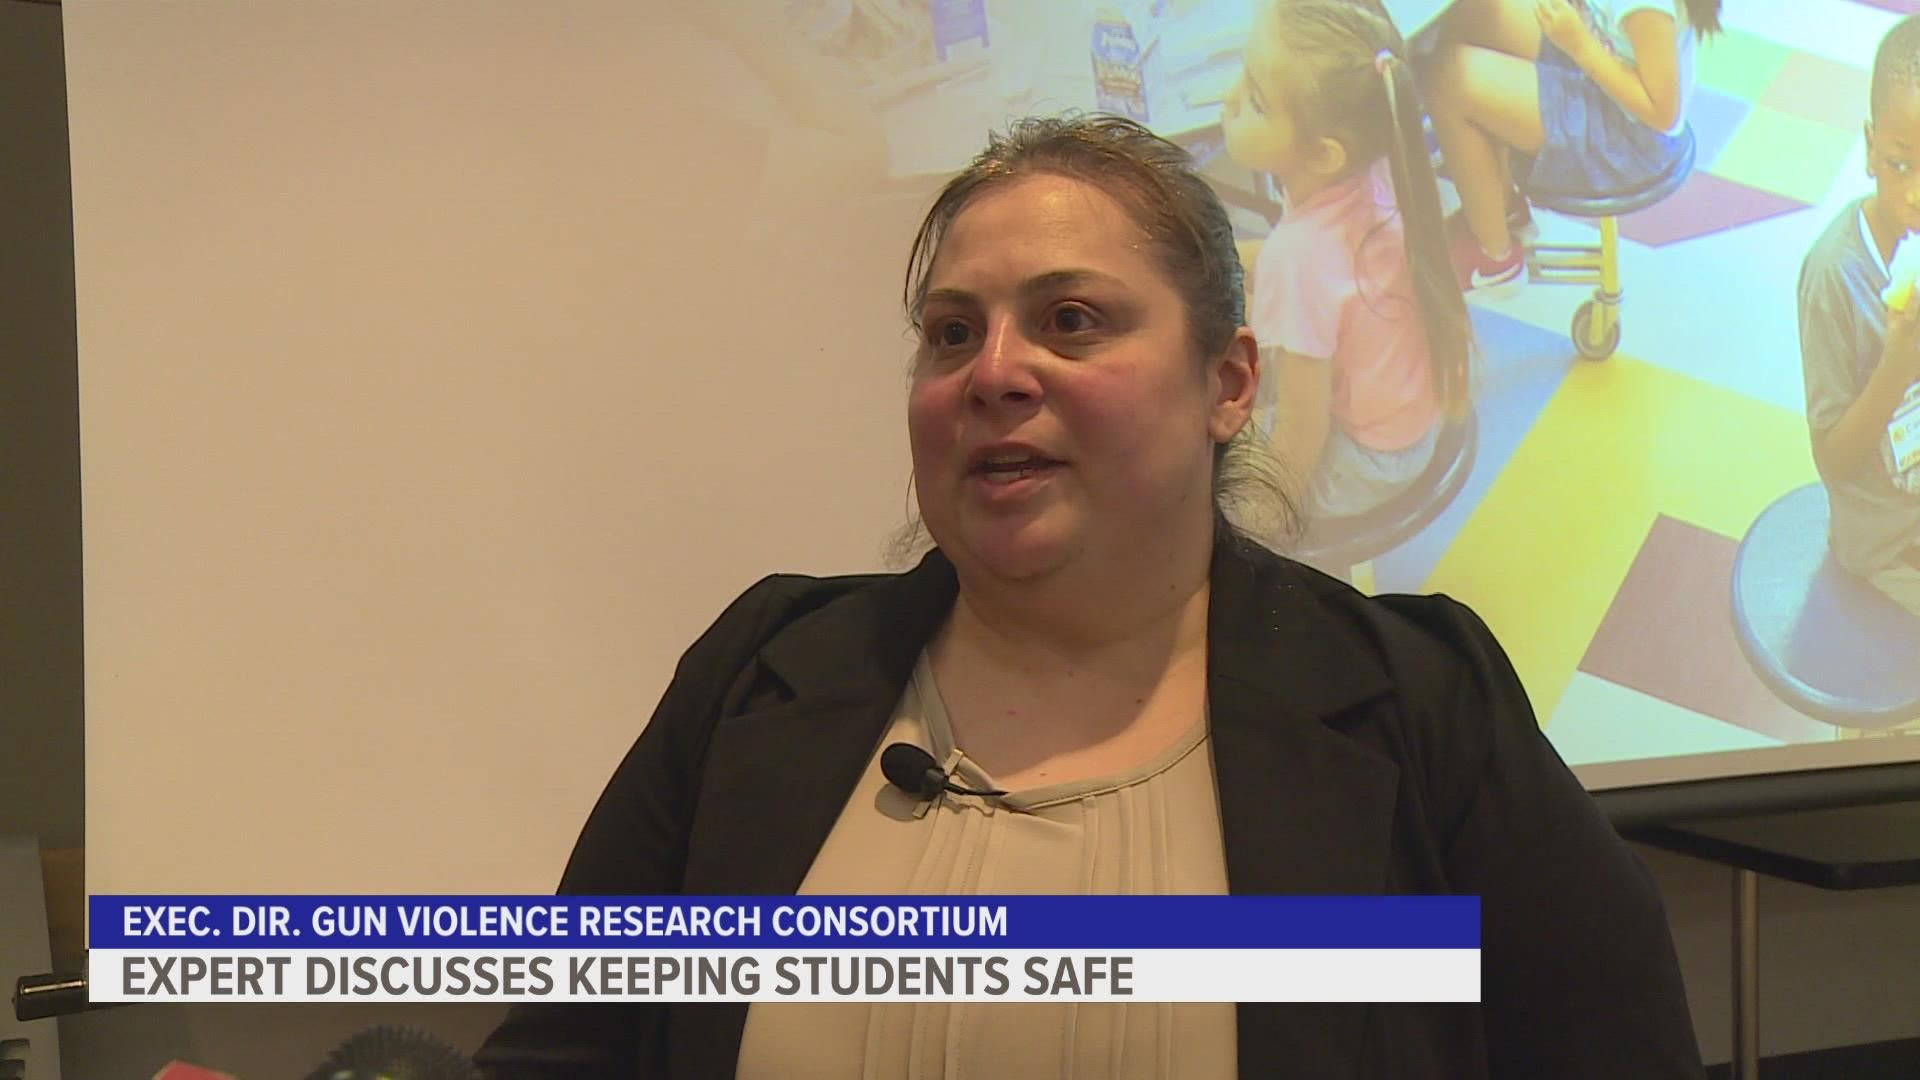 At the presentation, expert Jaclyn Schildkraut said school shootings can be prevented with the right safety plans in place.